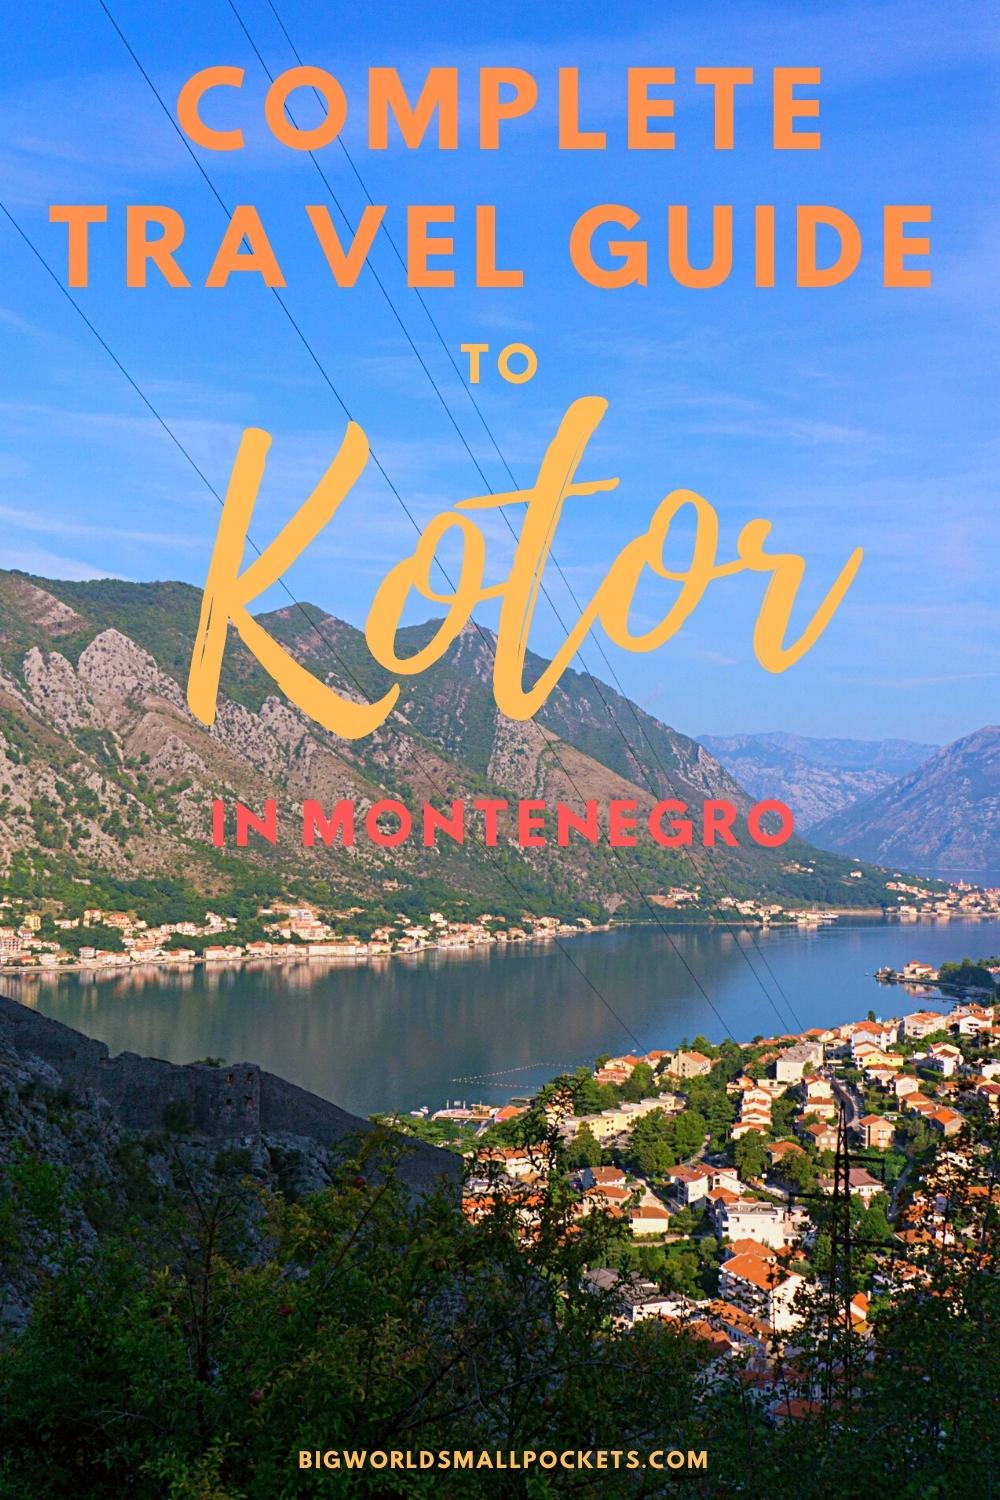 Complete Travel Guide to Kotor in Montenegro